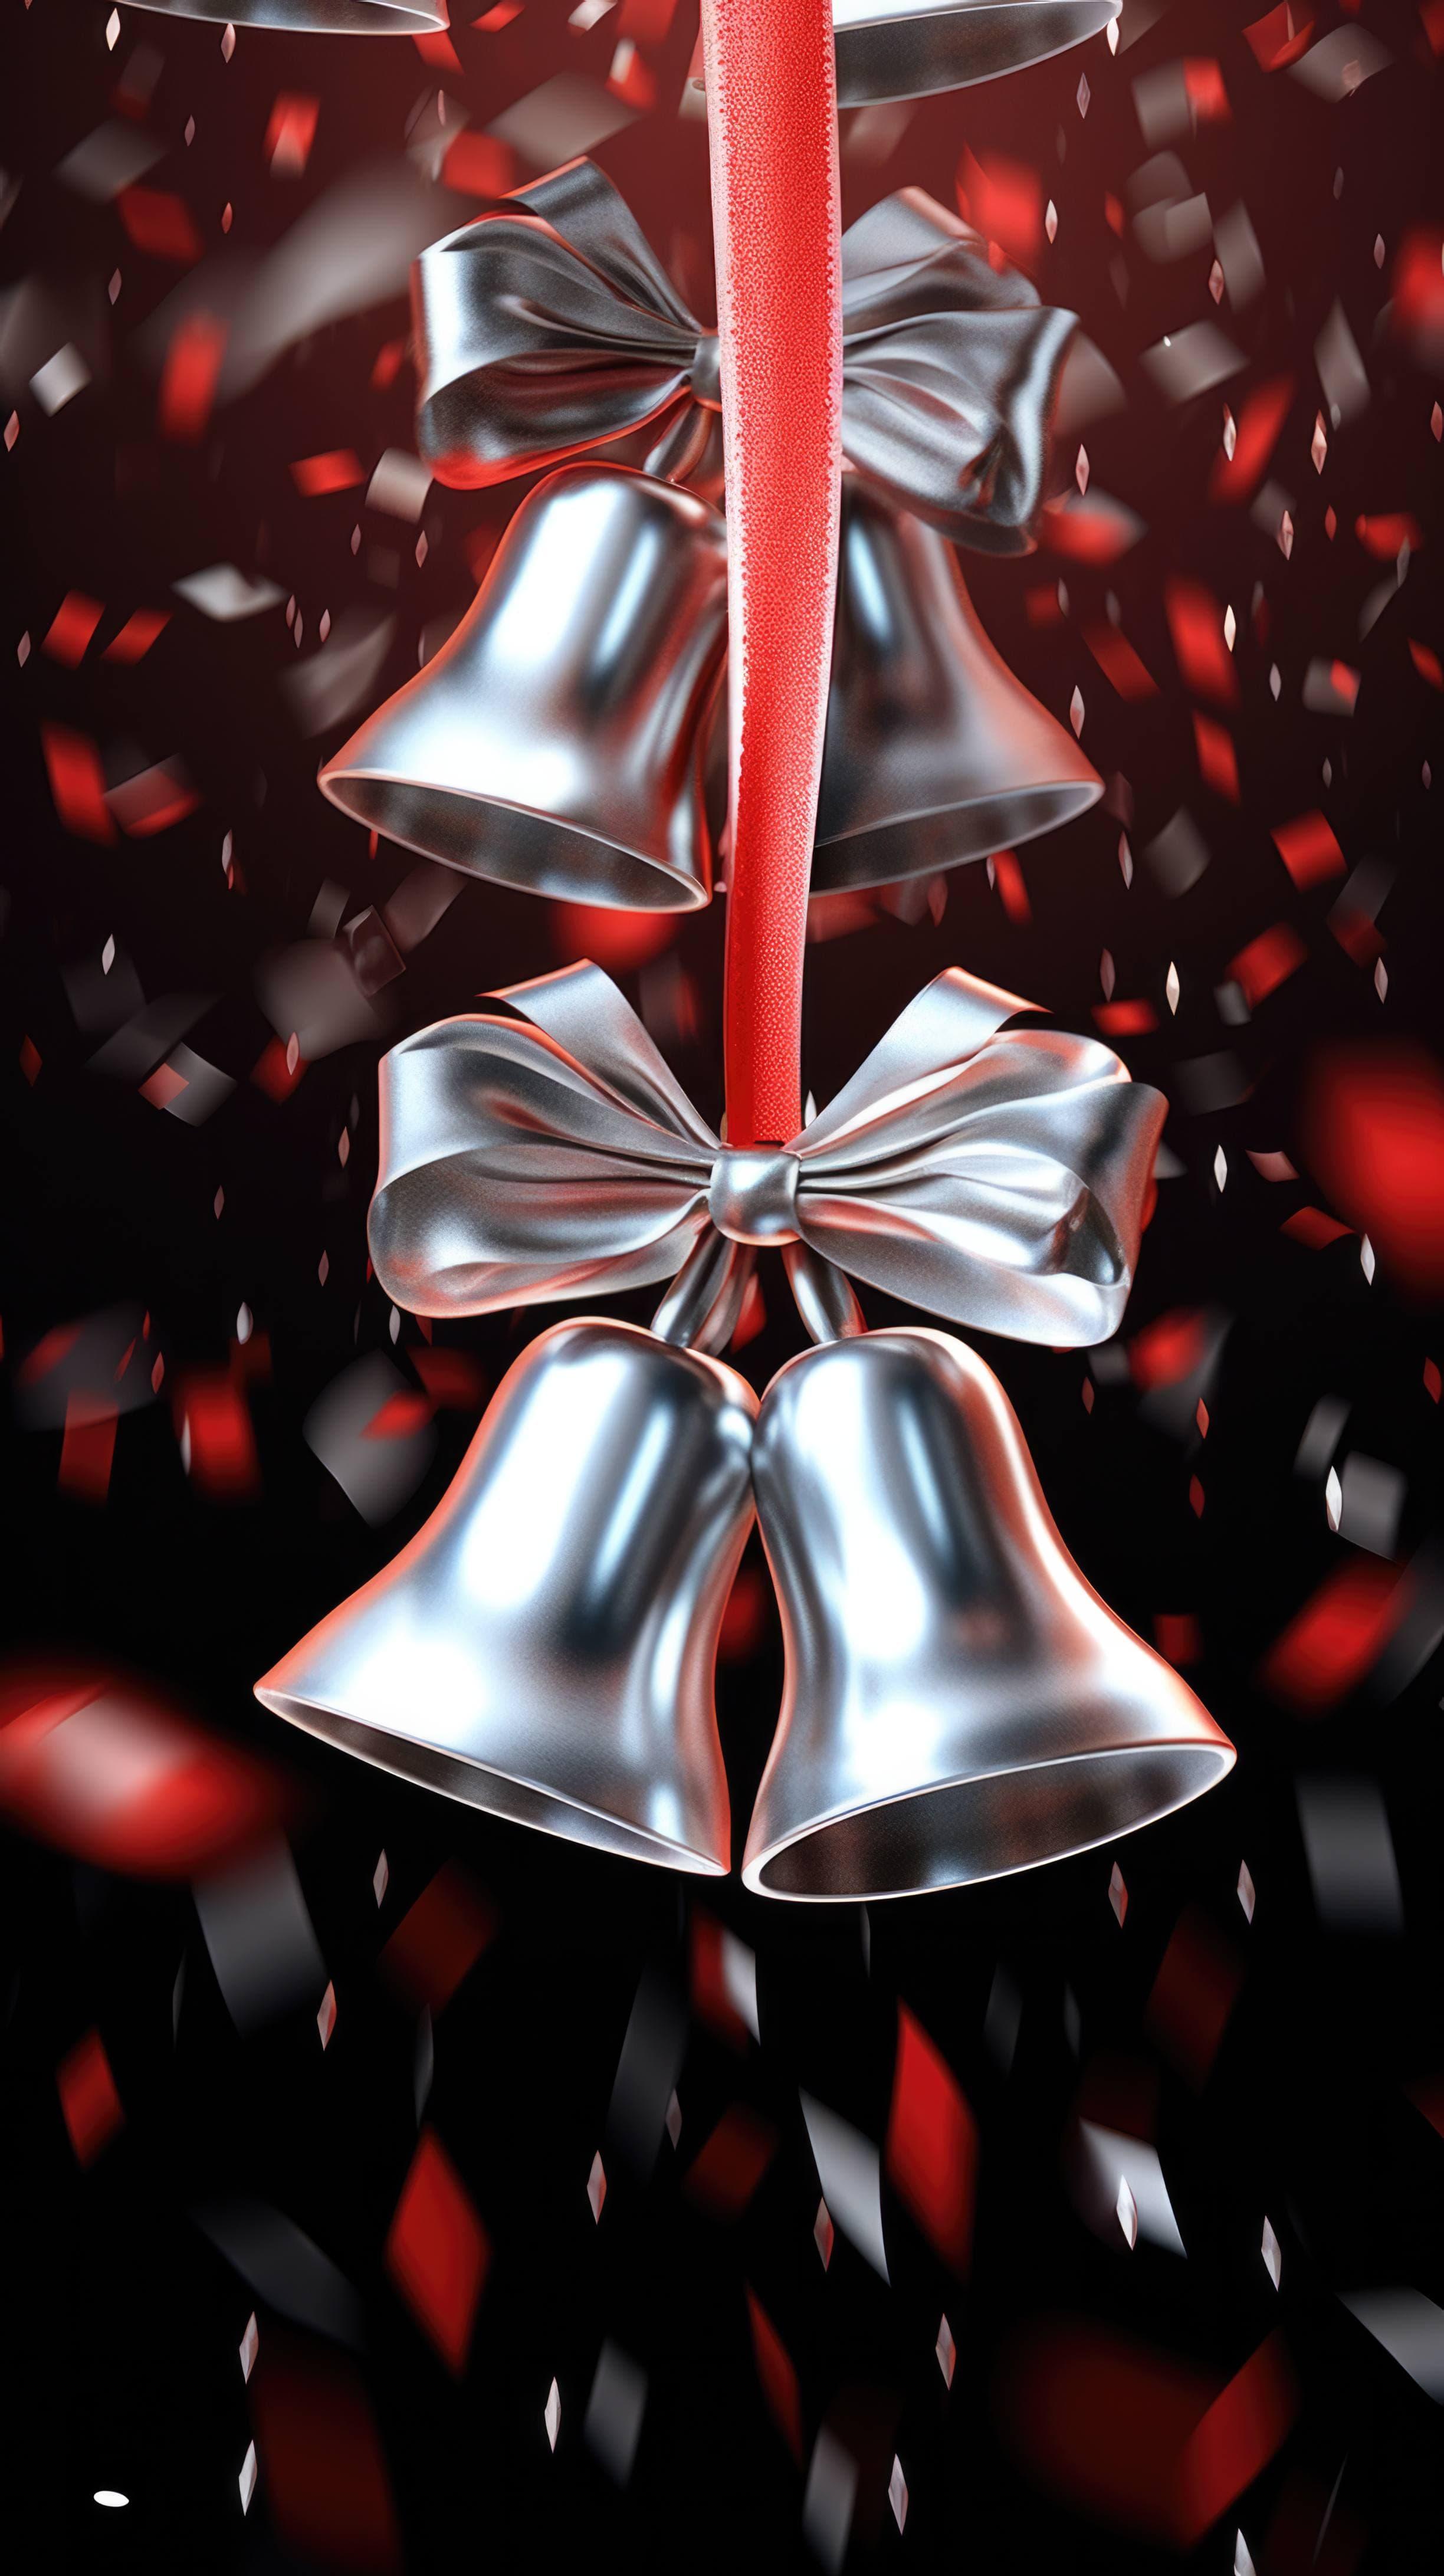 A Mobile Wallpaper Of Silver Bells With Red Ribbon